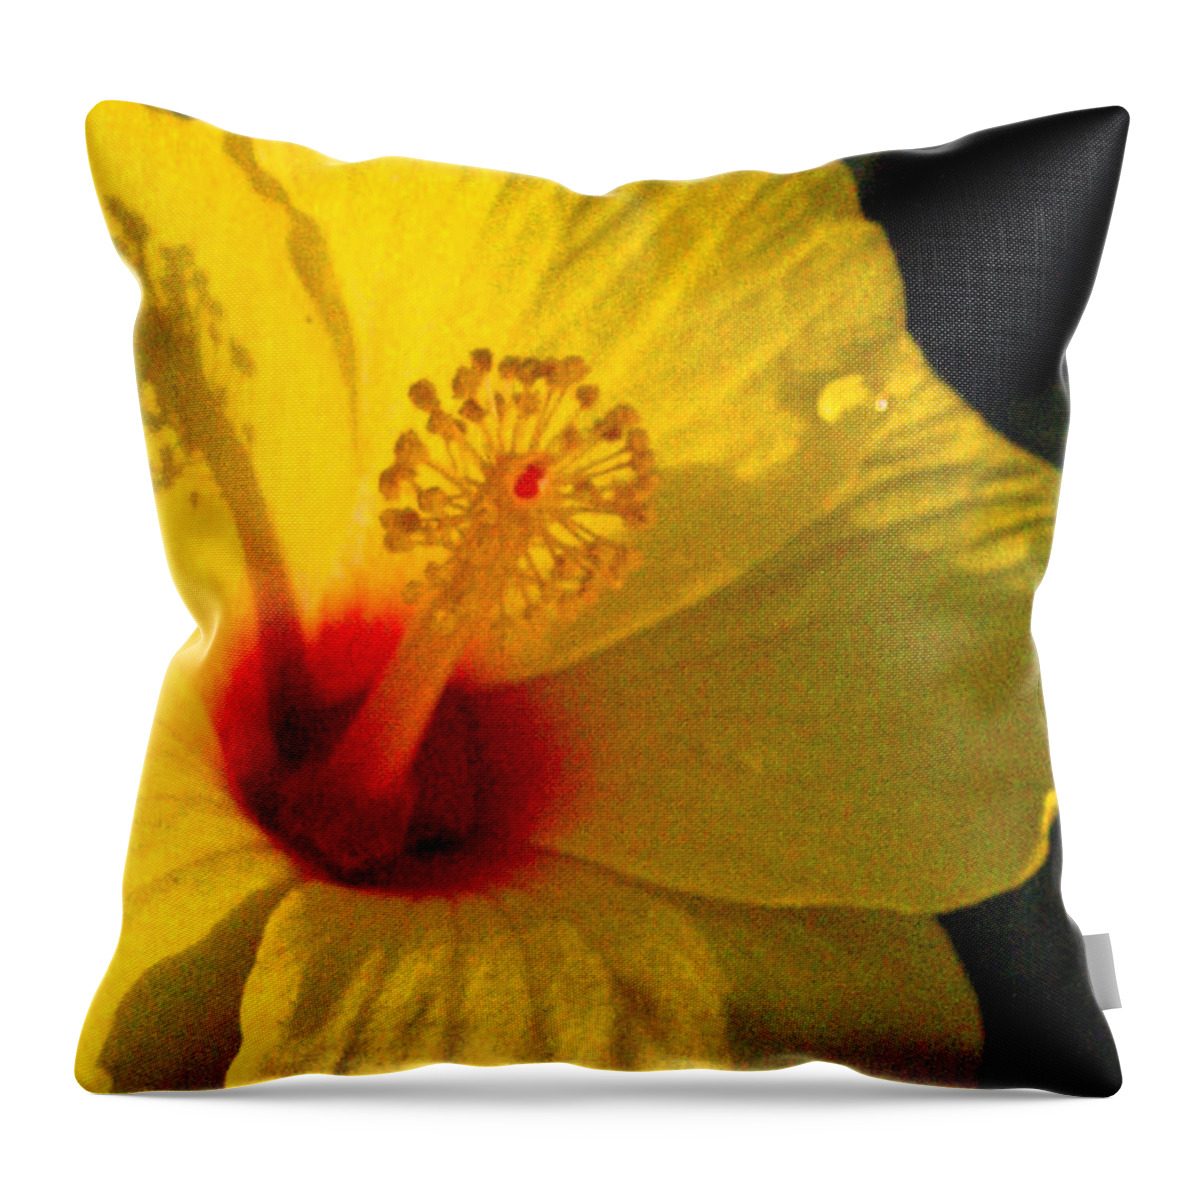 Giant Yellow And Red Hibiscus Throw Pillow featuring the digital art Yellow Satellite by Pamela Smale Williams